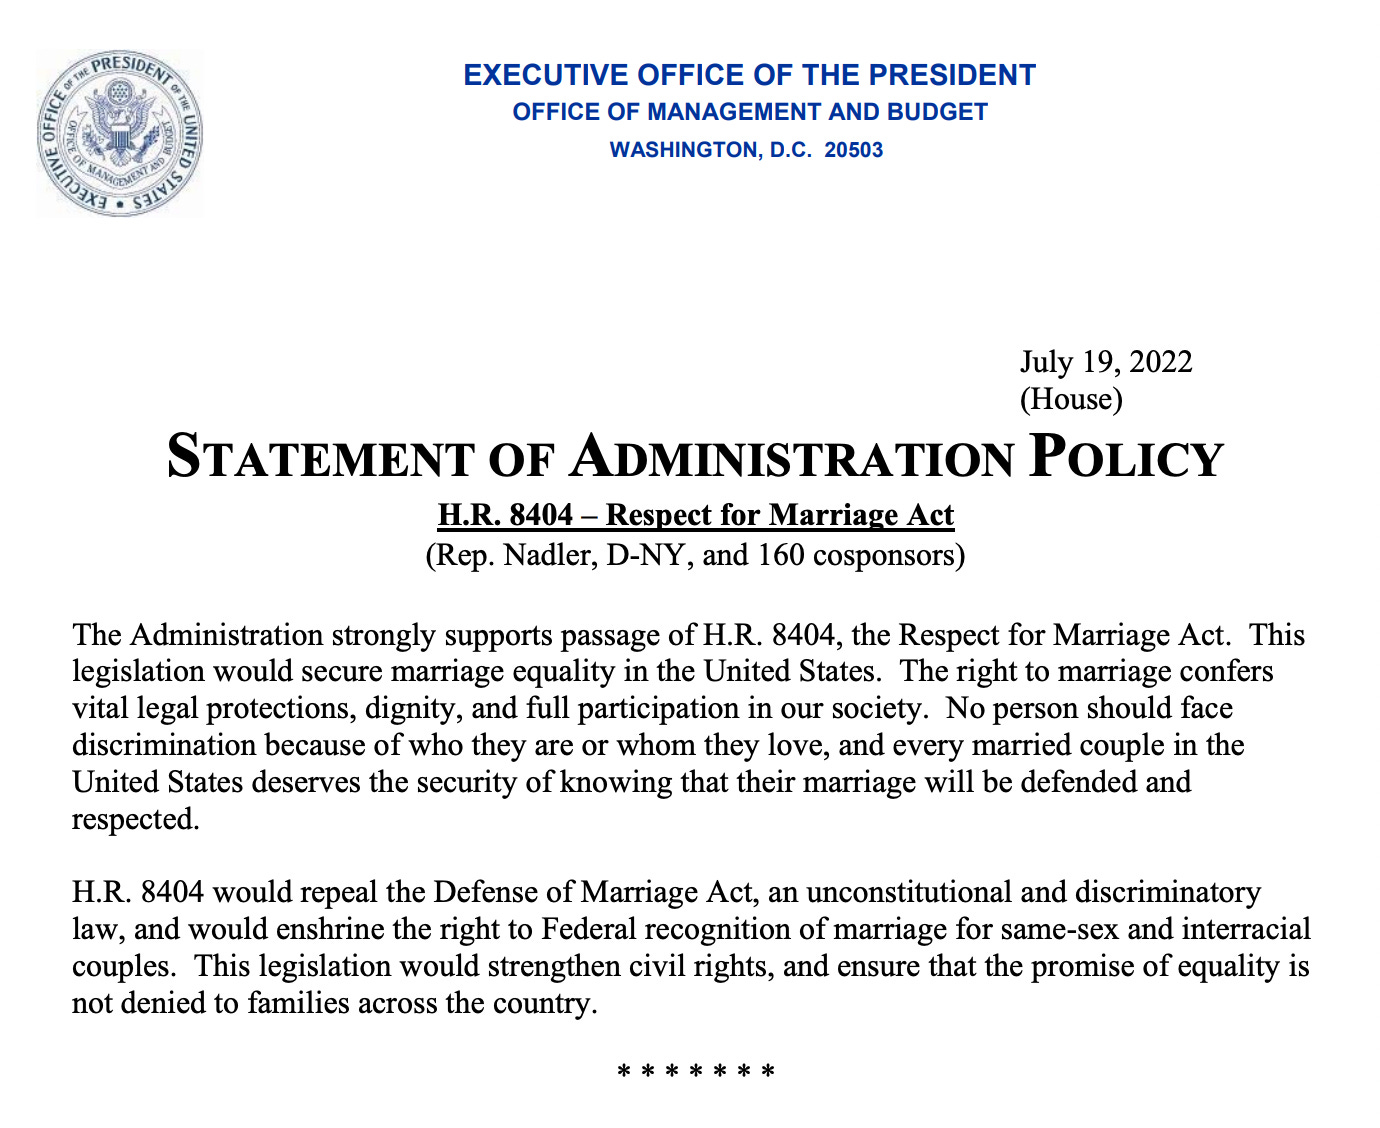 TEXT: "STATEMENT OF ADMINISTRATION POLICY H.R. 8404 – Respect for Marriage Act (Rep. Nadler, D-NY, and 160 cosponsors) The Administration strongly supports passage of H.R. 8404, the Respect for Marriage Act.  This legislation would secure marriage equality in the United States.  The right to marriage confers vital legal protections, dignity, and full participation in our society.  No person should face discrimination because of who they are or whom they love, and every married couple in the United States deserves the security of knowing that their marriage will be defended and respected.    H.R. 8404 would repeal the Defense of Marriage Act, an unconstitutional and discriminatory law, and would enshrine the right to Federal recognition of marriage for same-sex and interracial couples.  This legislation would strengthen civil rights, and ensure that the promise of equality is not denied to families across the country."